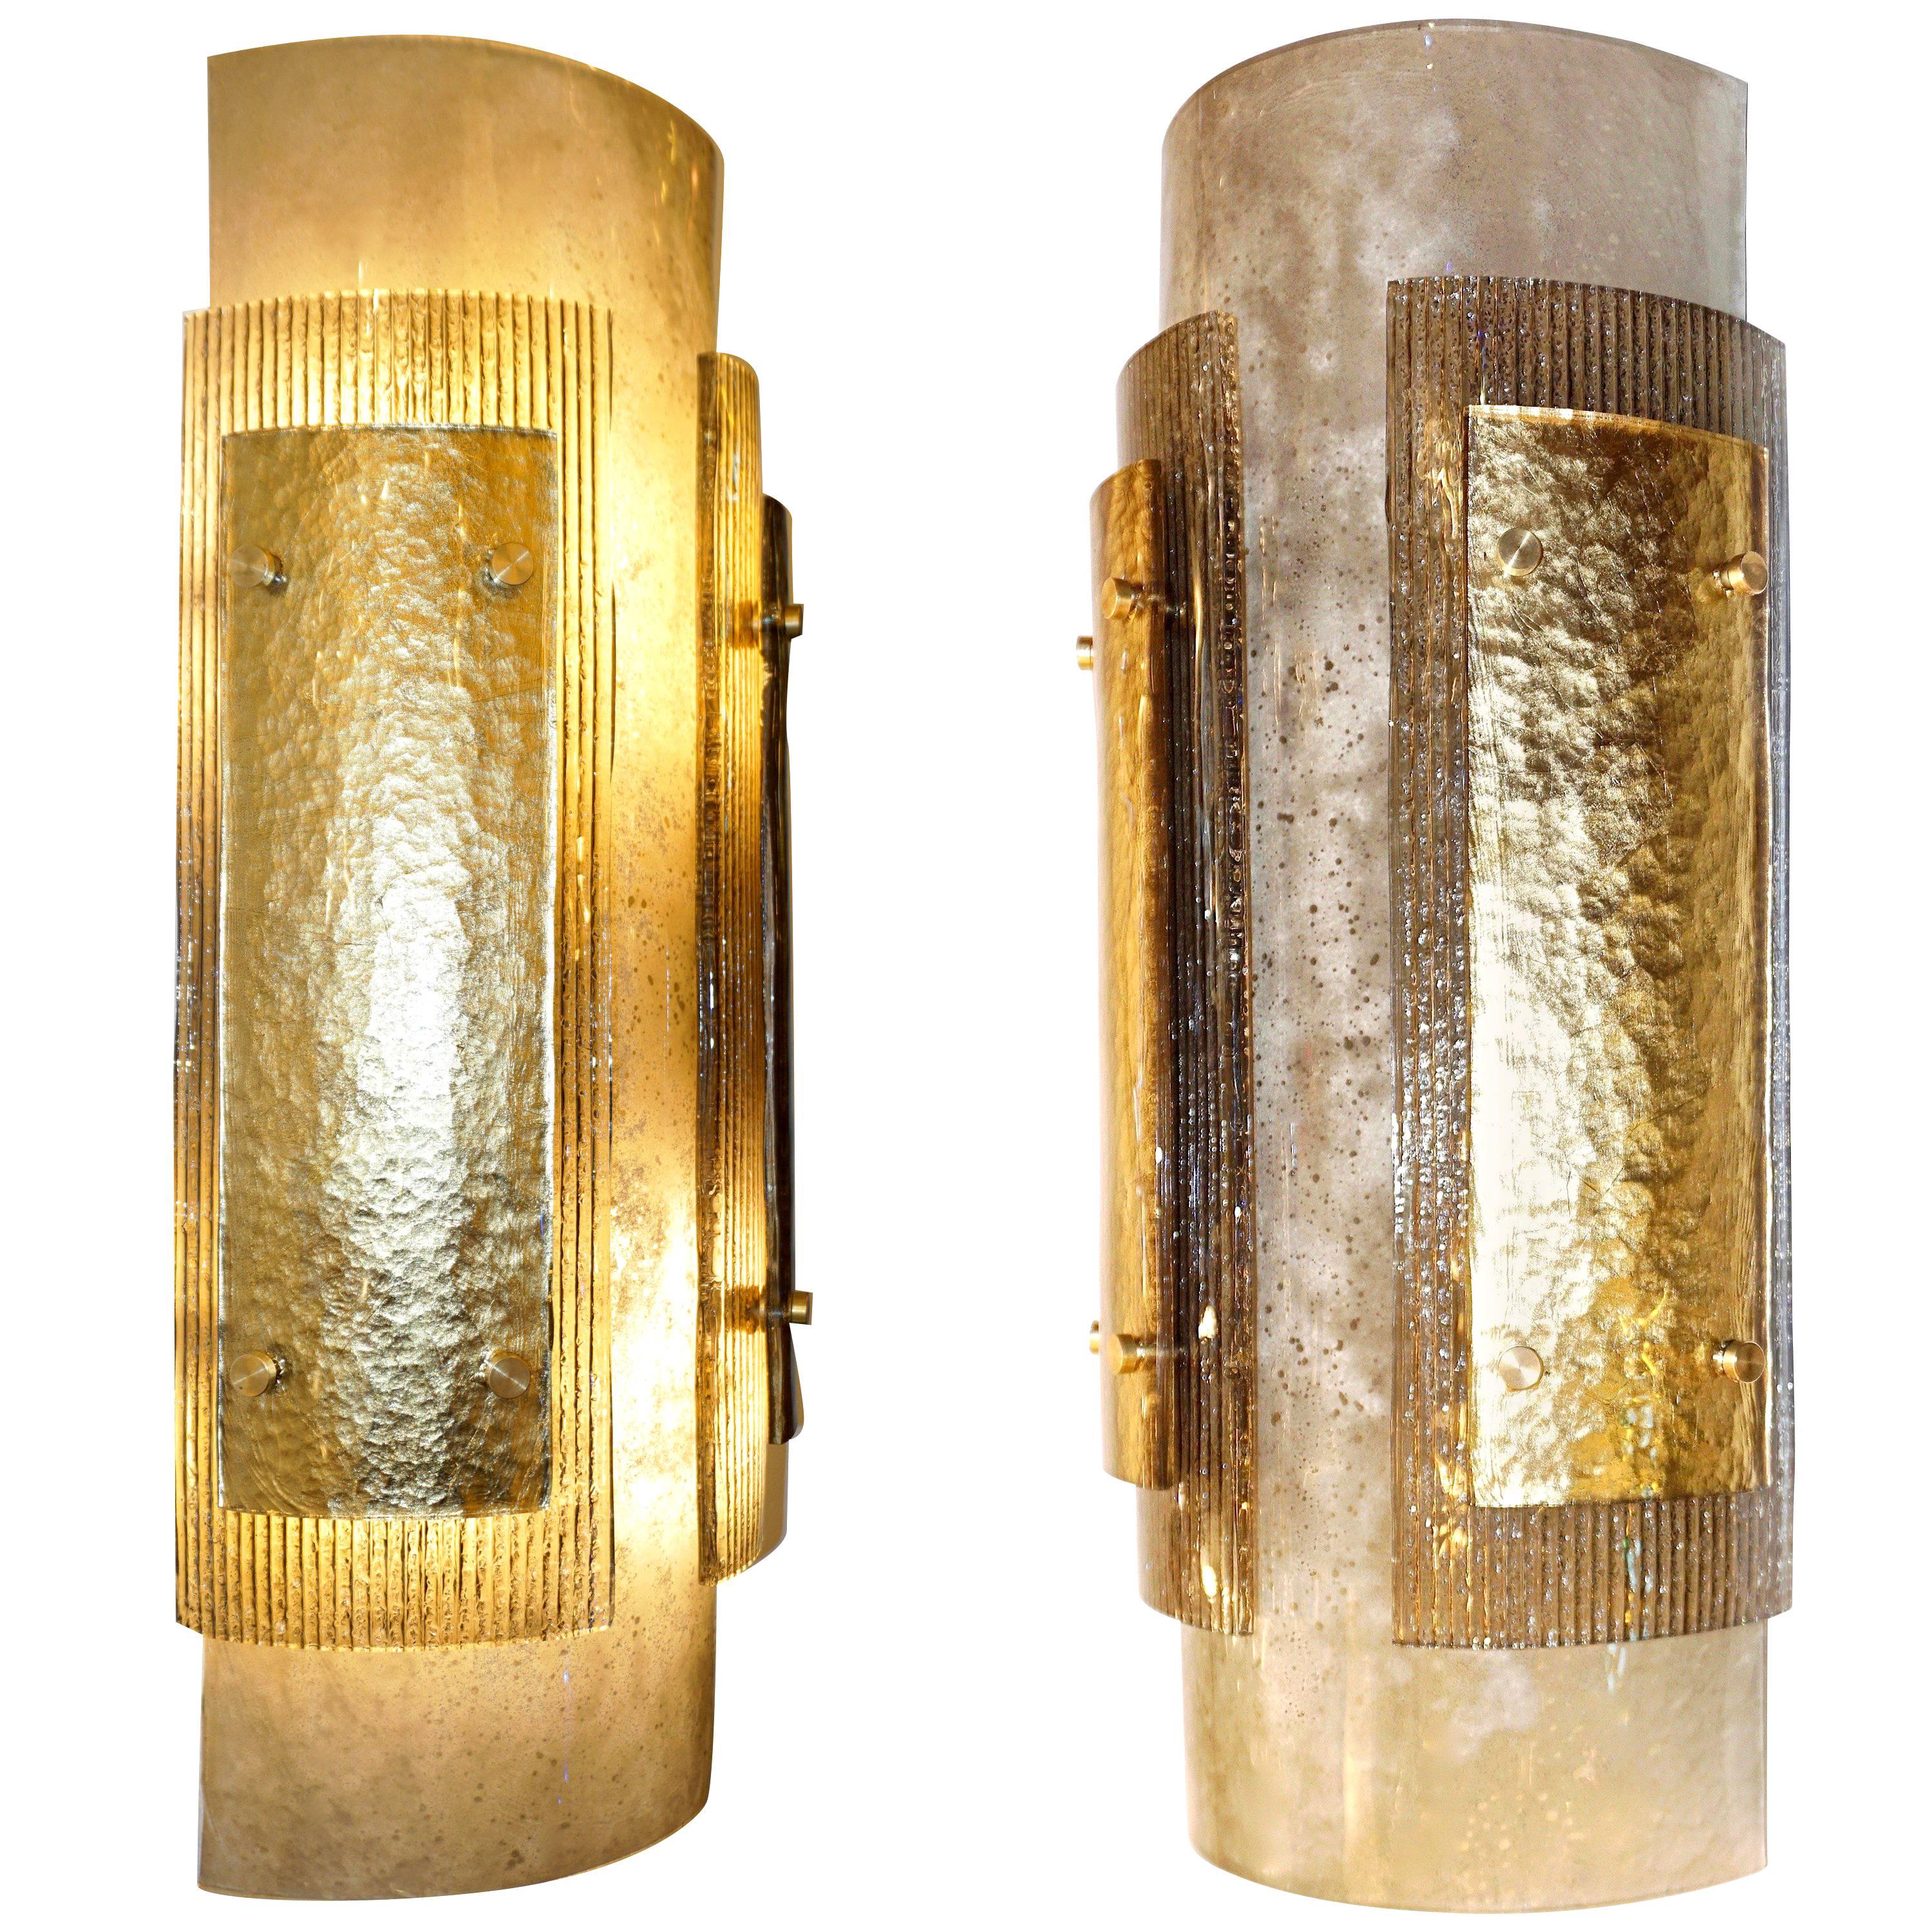 Contemporary Italian wall lights in high quality curved blown murano glass, entirely handcrafted, three different textures and colors, the frosted smoked grey body is decorated with two stepped glass layers: one with a sophisticated pattern on the